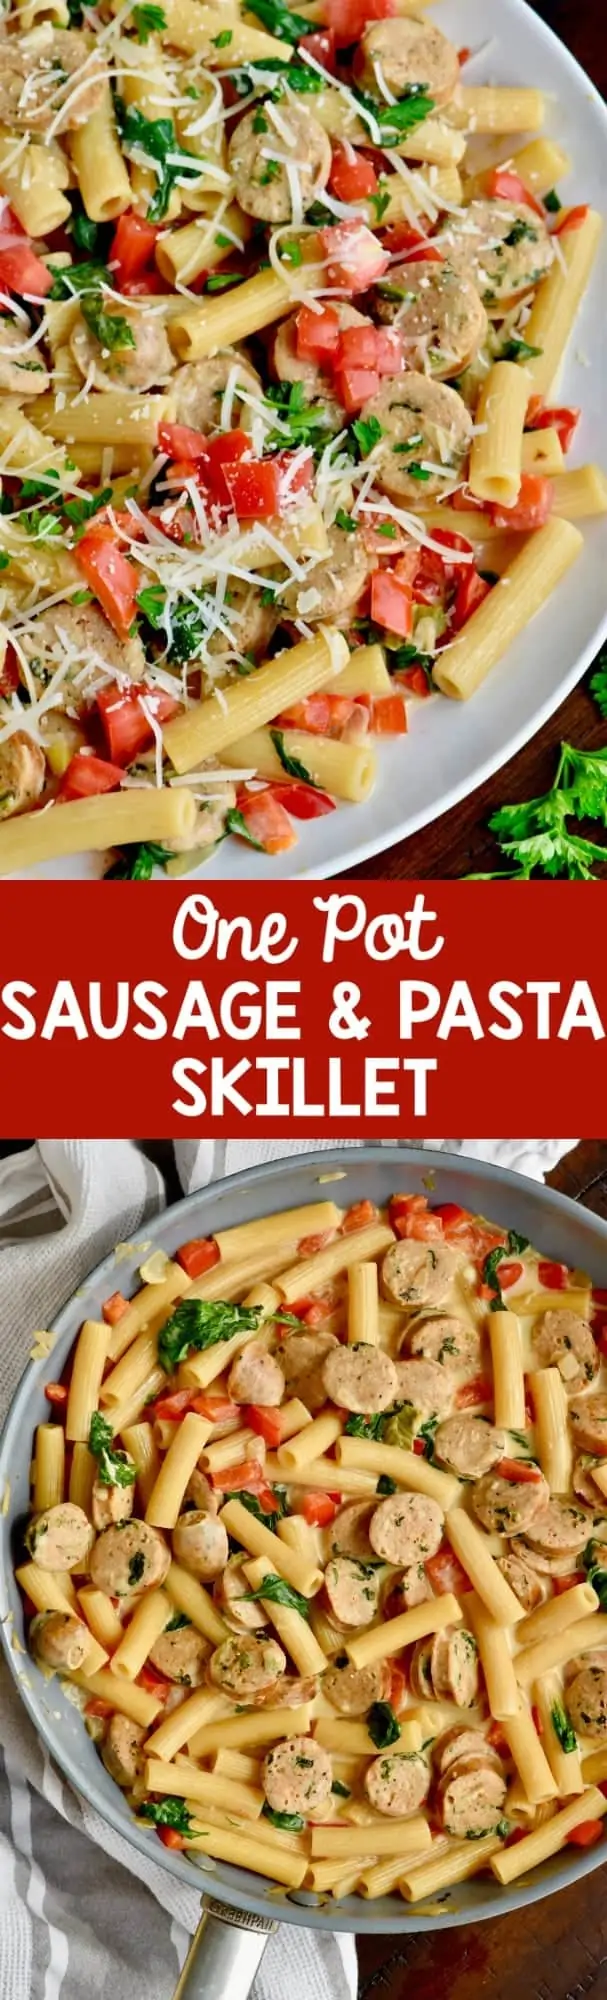 In a skillet, the Sausage Pasta Skillet shows the different rainbow colors from the sausage, pasta, spinach, red peppers, and tomatoes. 